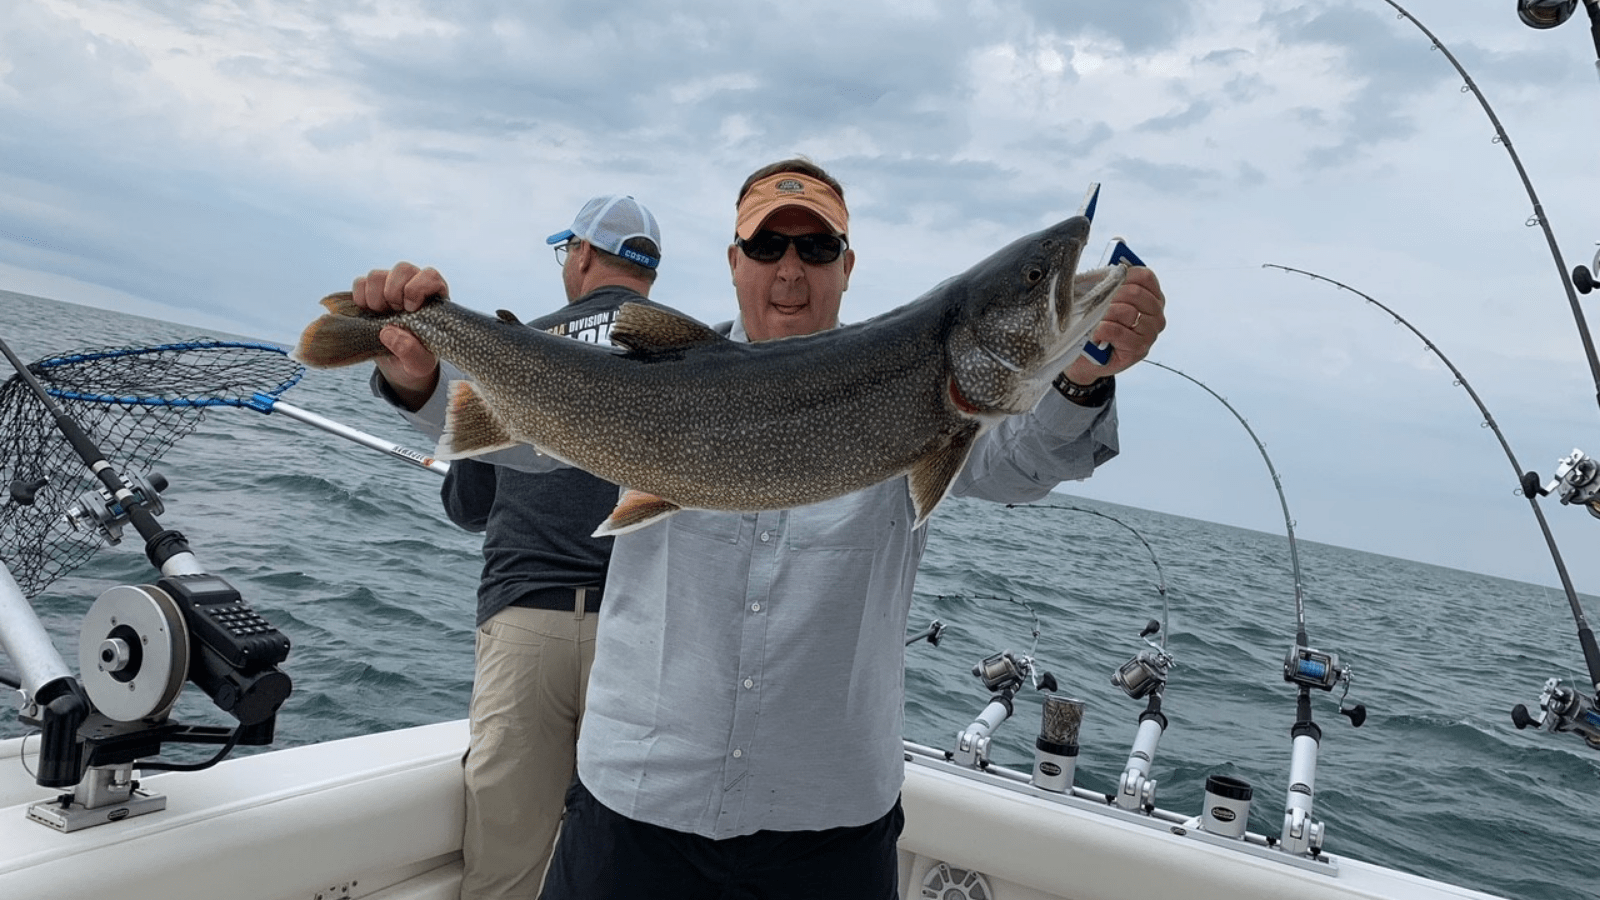 Sportfishing client holds up large catch on boat in the Great Lakes.